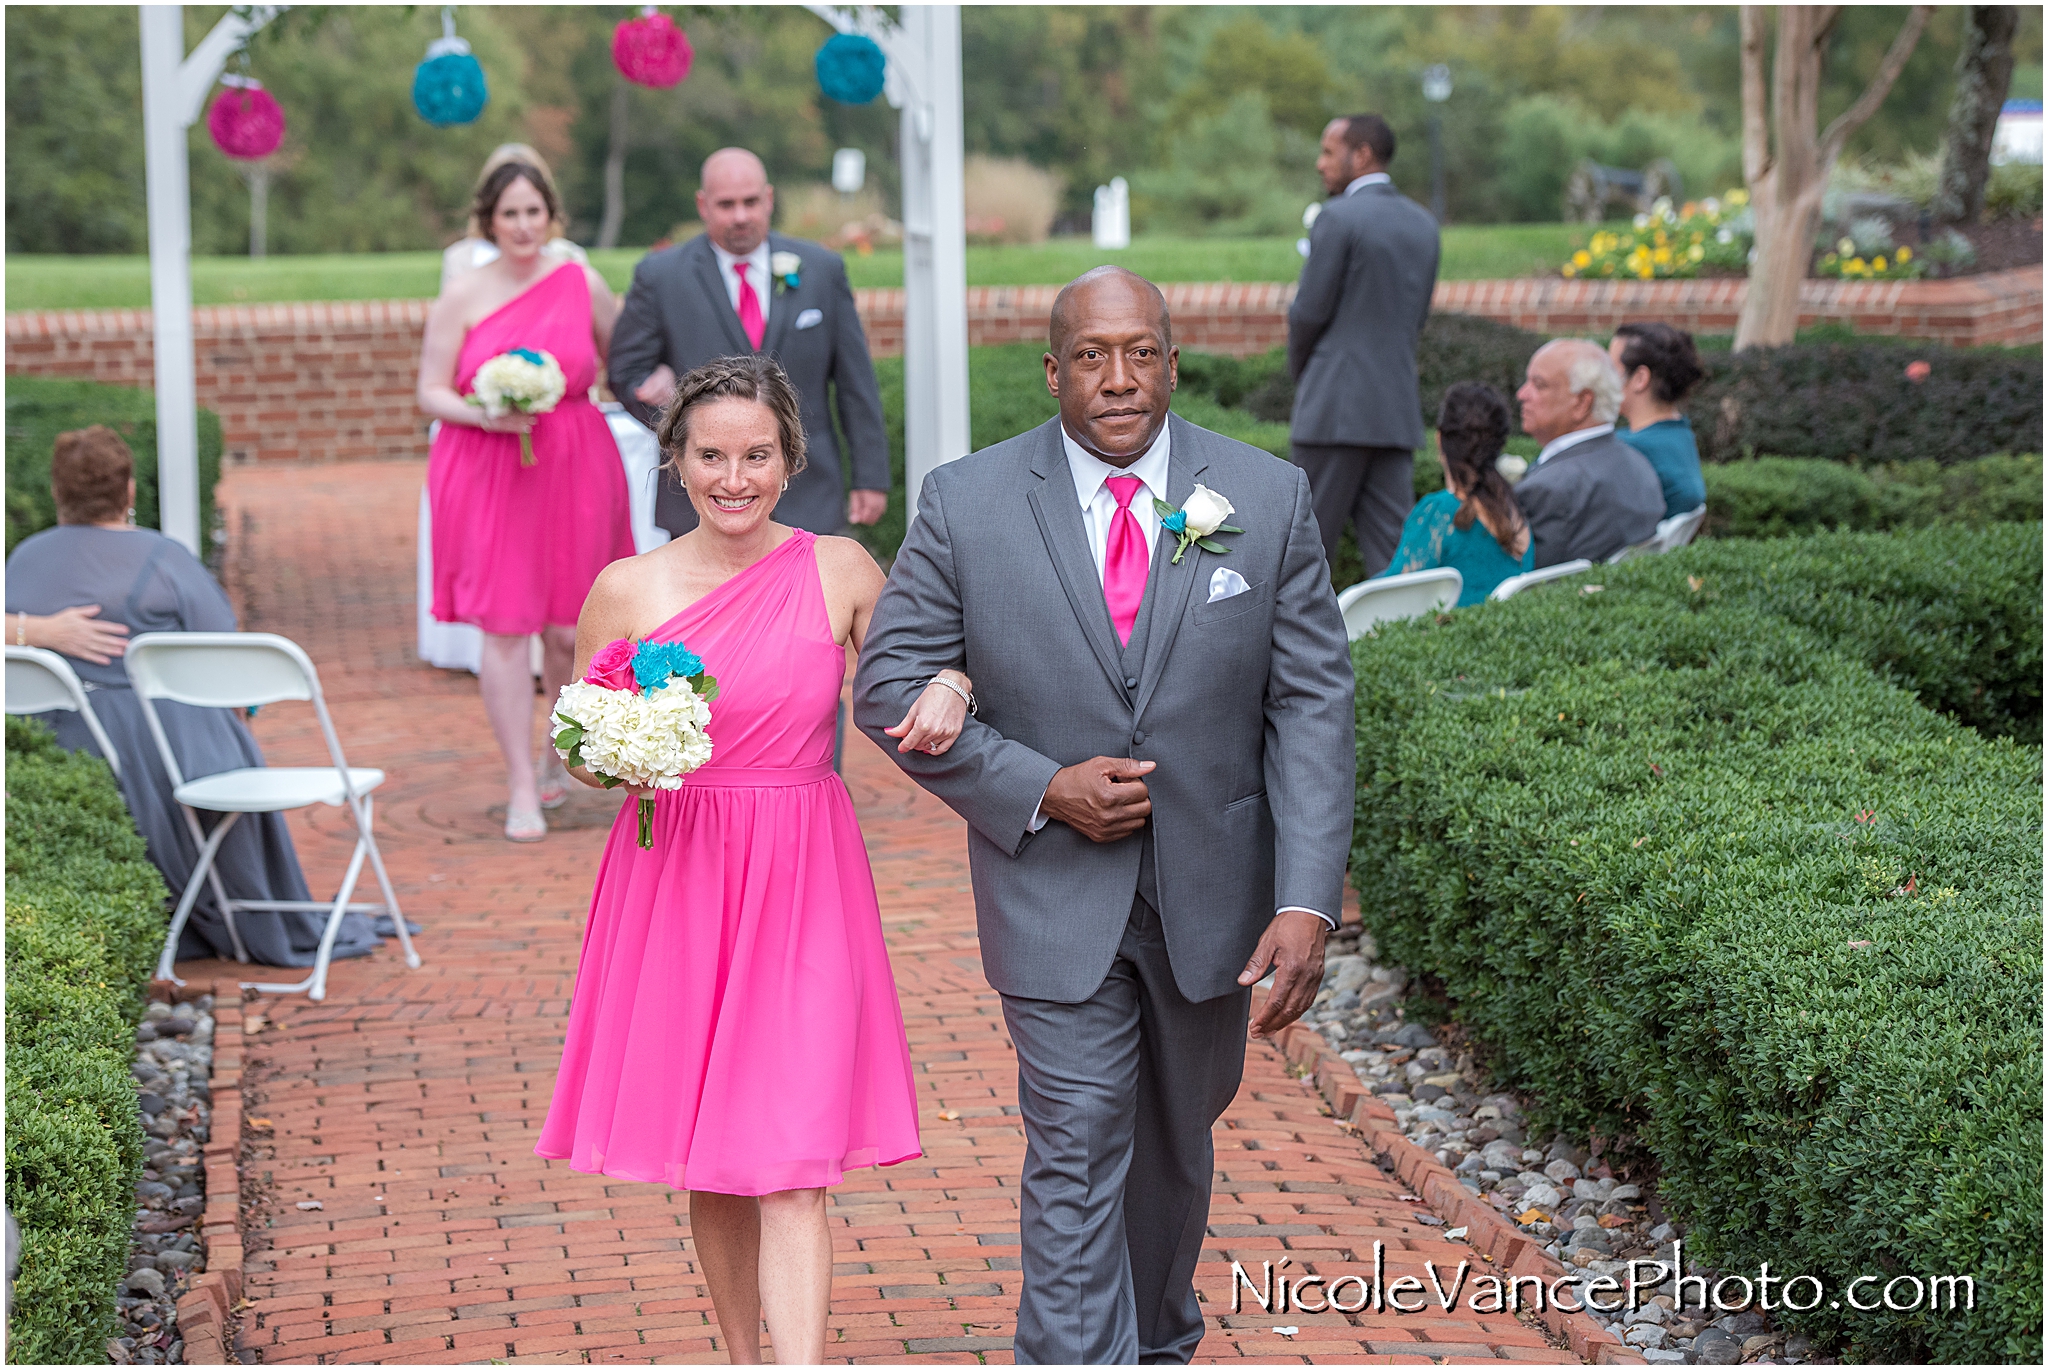 The wedding party exits the ceremony at Virginia Crossings.